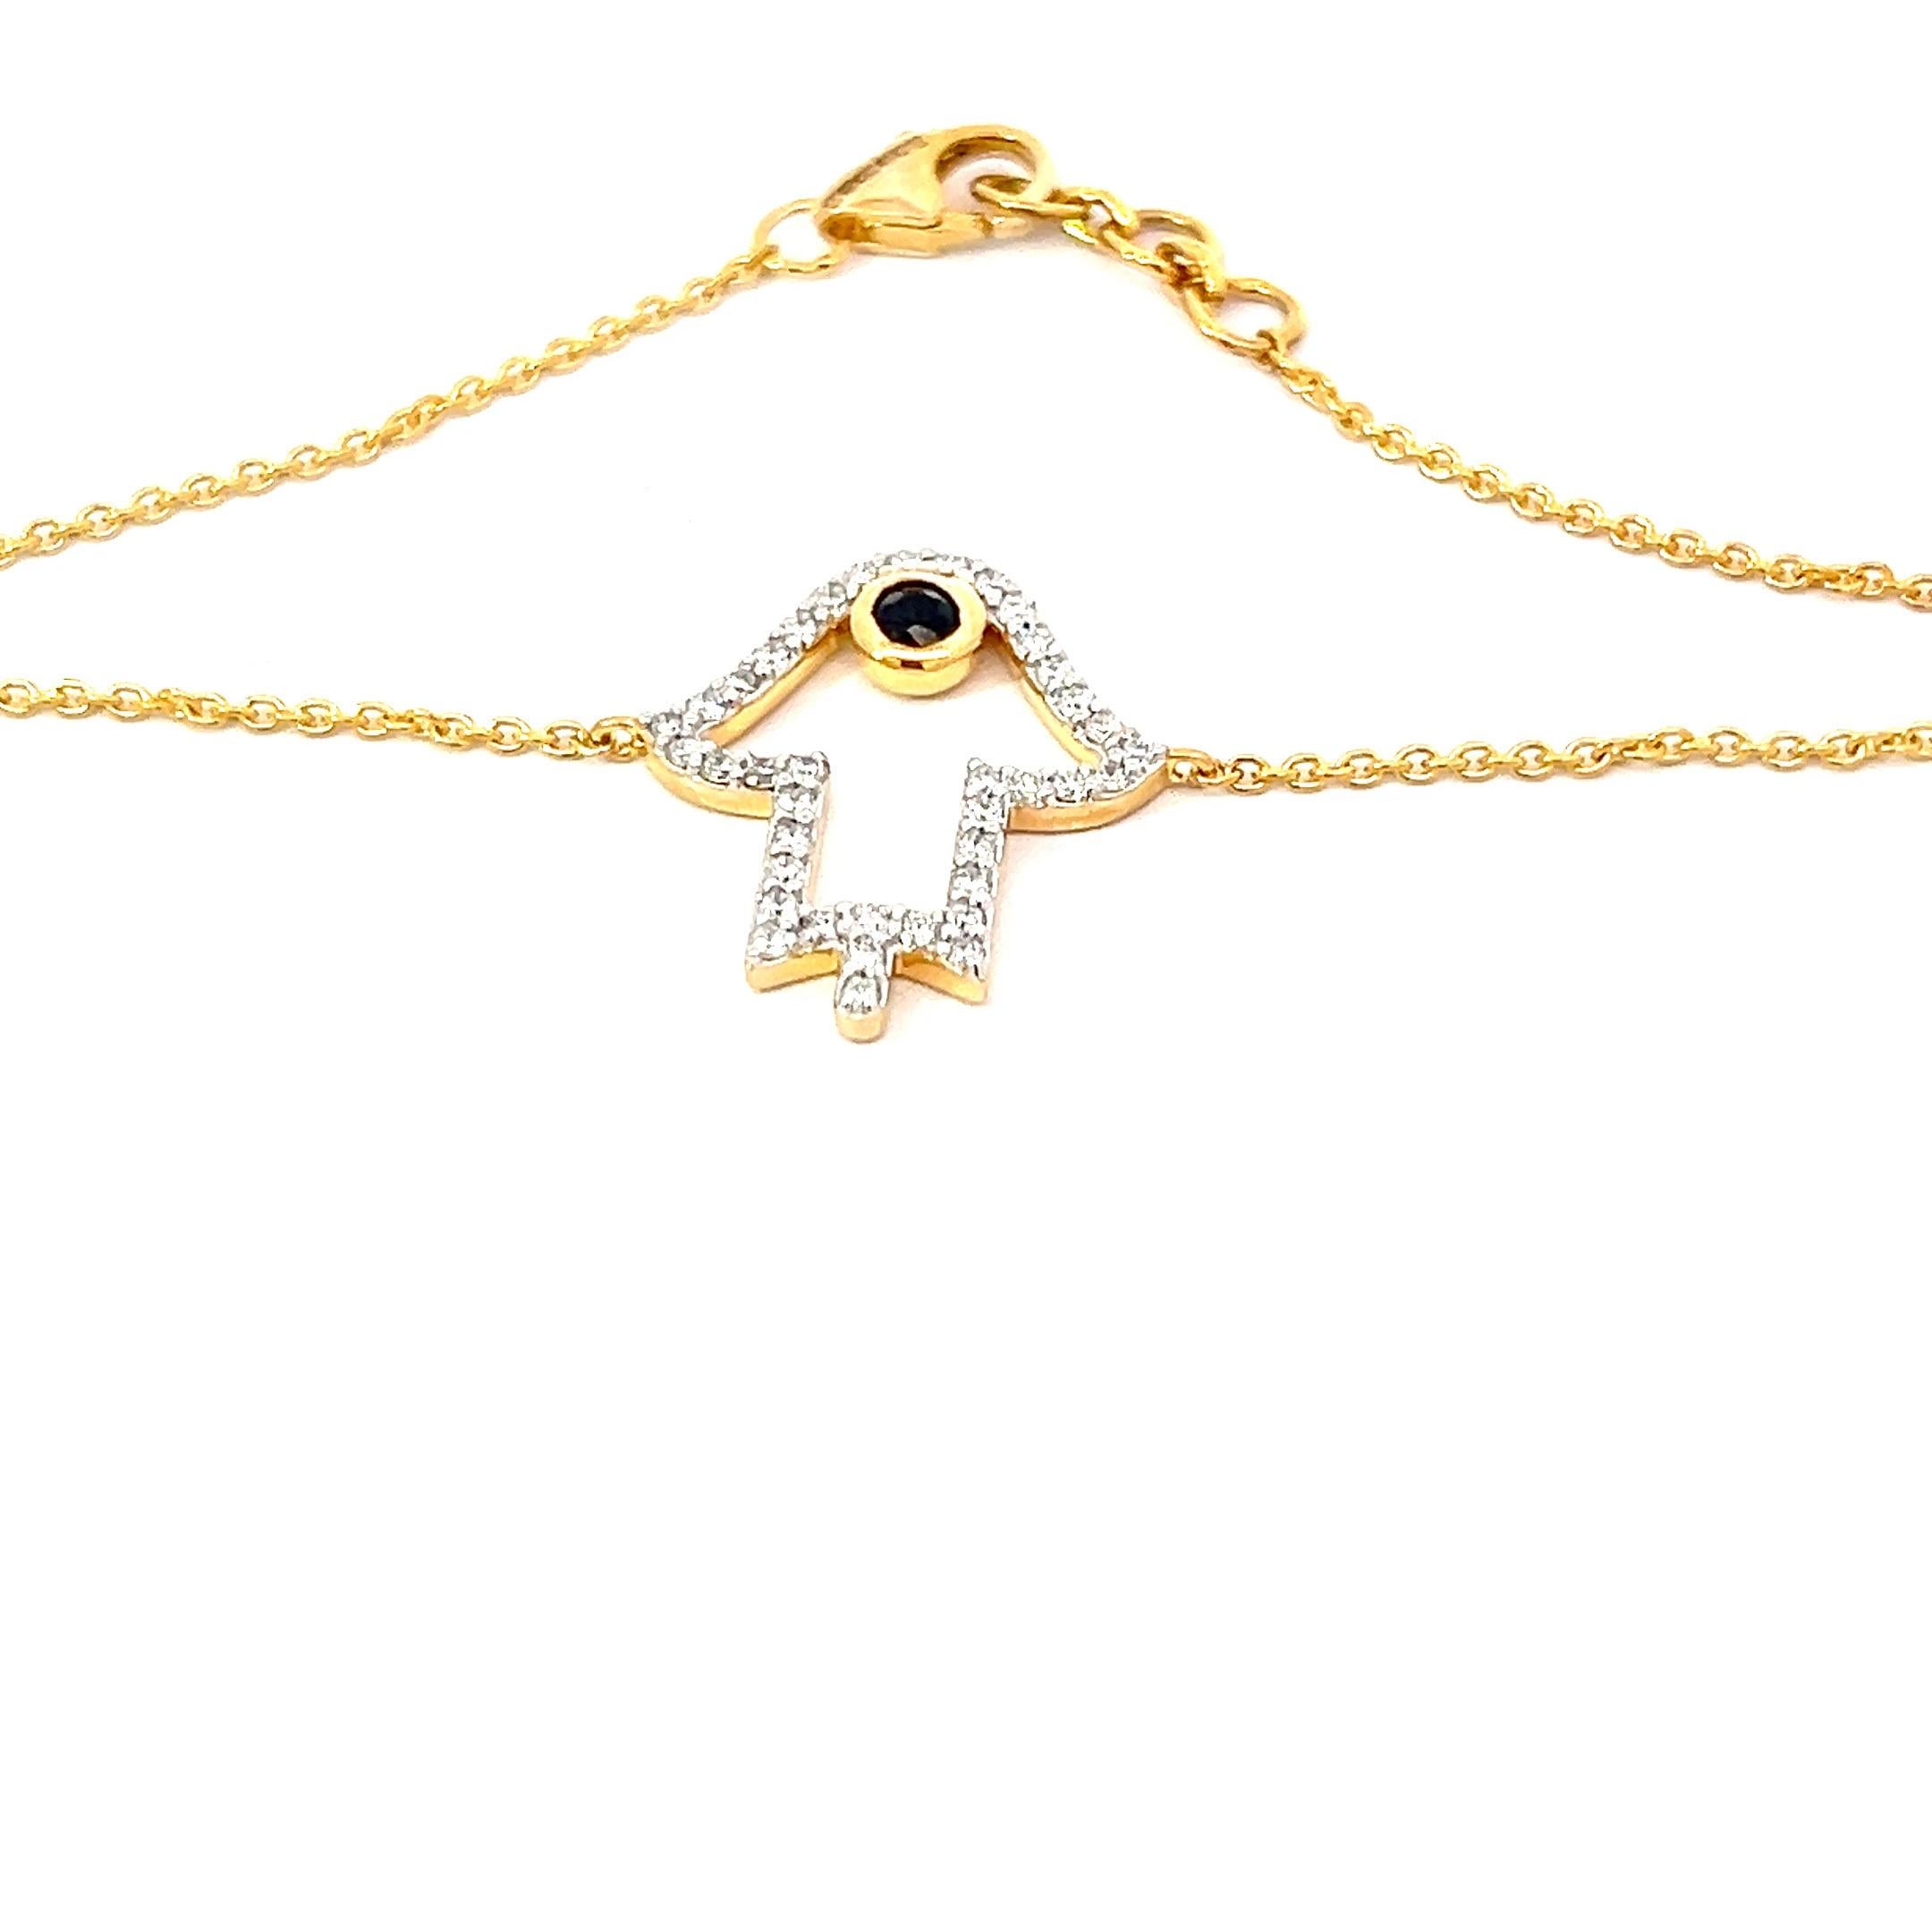 This luxurious Diamond Khamsa bracelet shimmers stunningly when it catches the light, featuring over 0.25ct Round Brilliant cut white diamonds colour G to H clarity VS-SI, with a sapphire centre gem weighting 0.10-0.15 carat. This bracelet